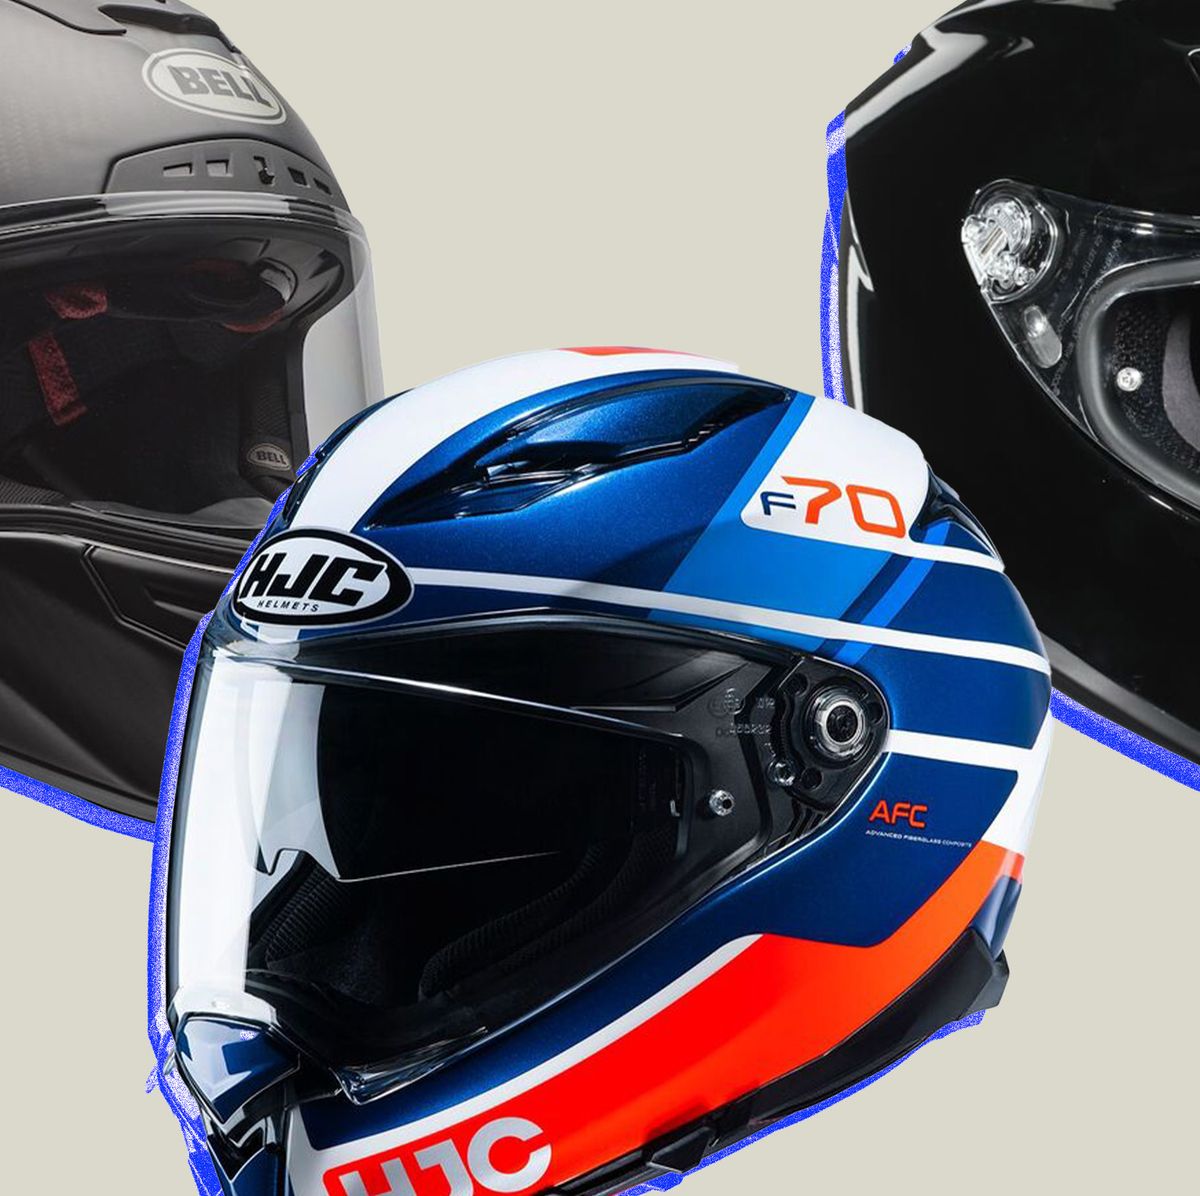 The Best Motorcycle Helmets You Can Buy